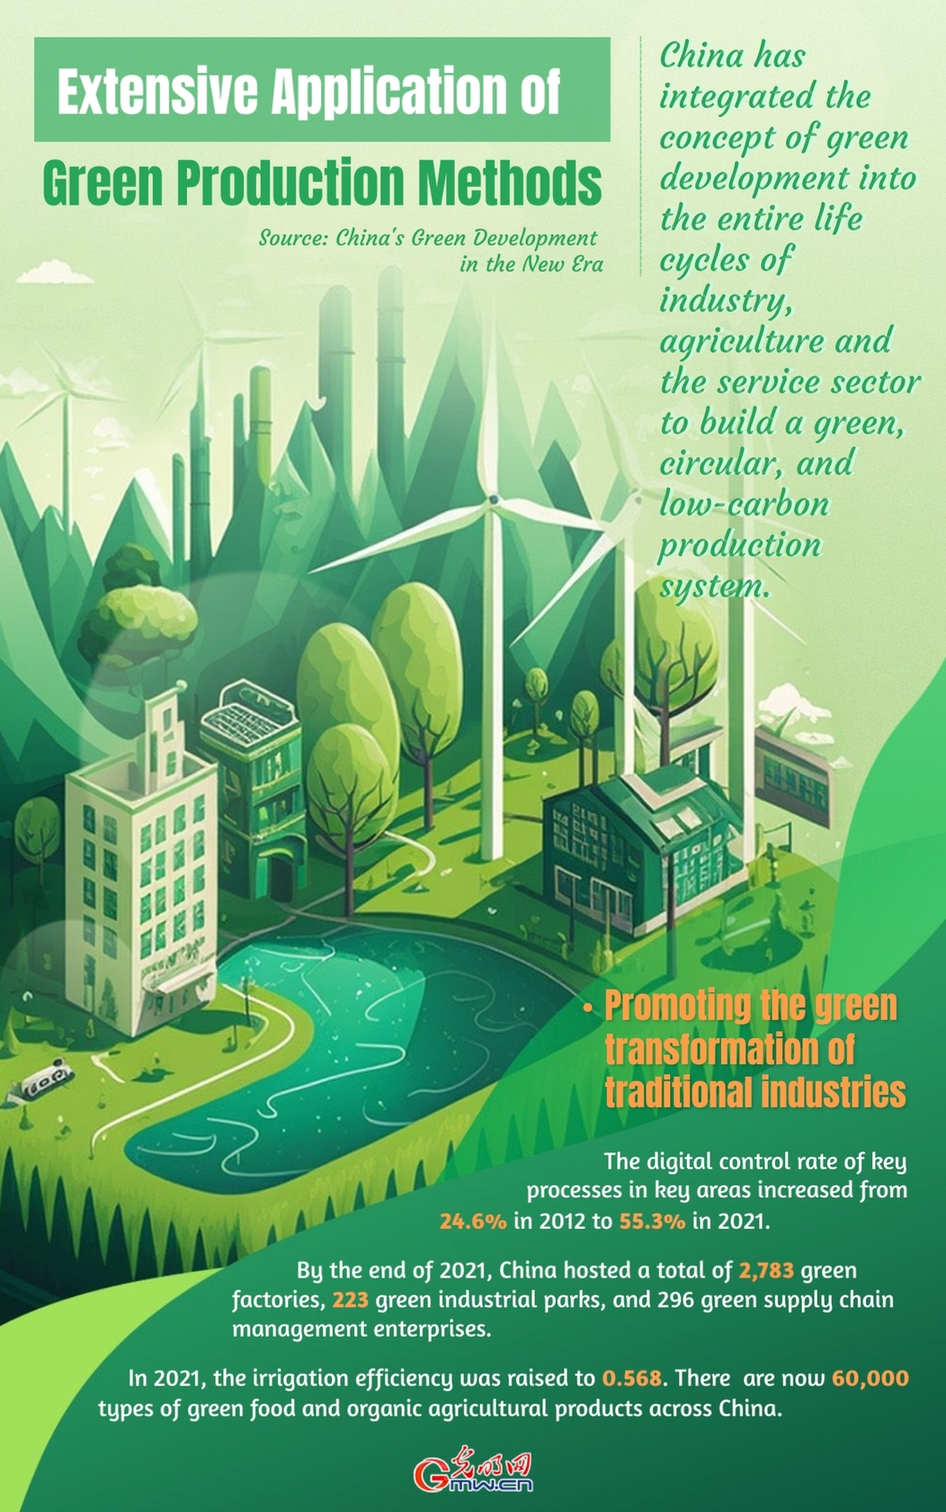 China’s Green Development in the New Era: Extensive Application of Green Production Methods